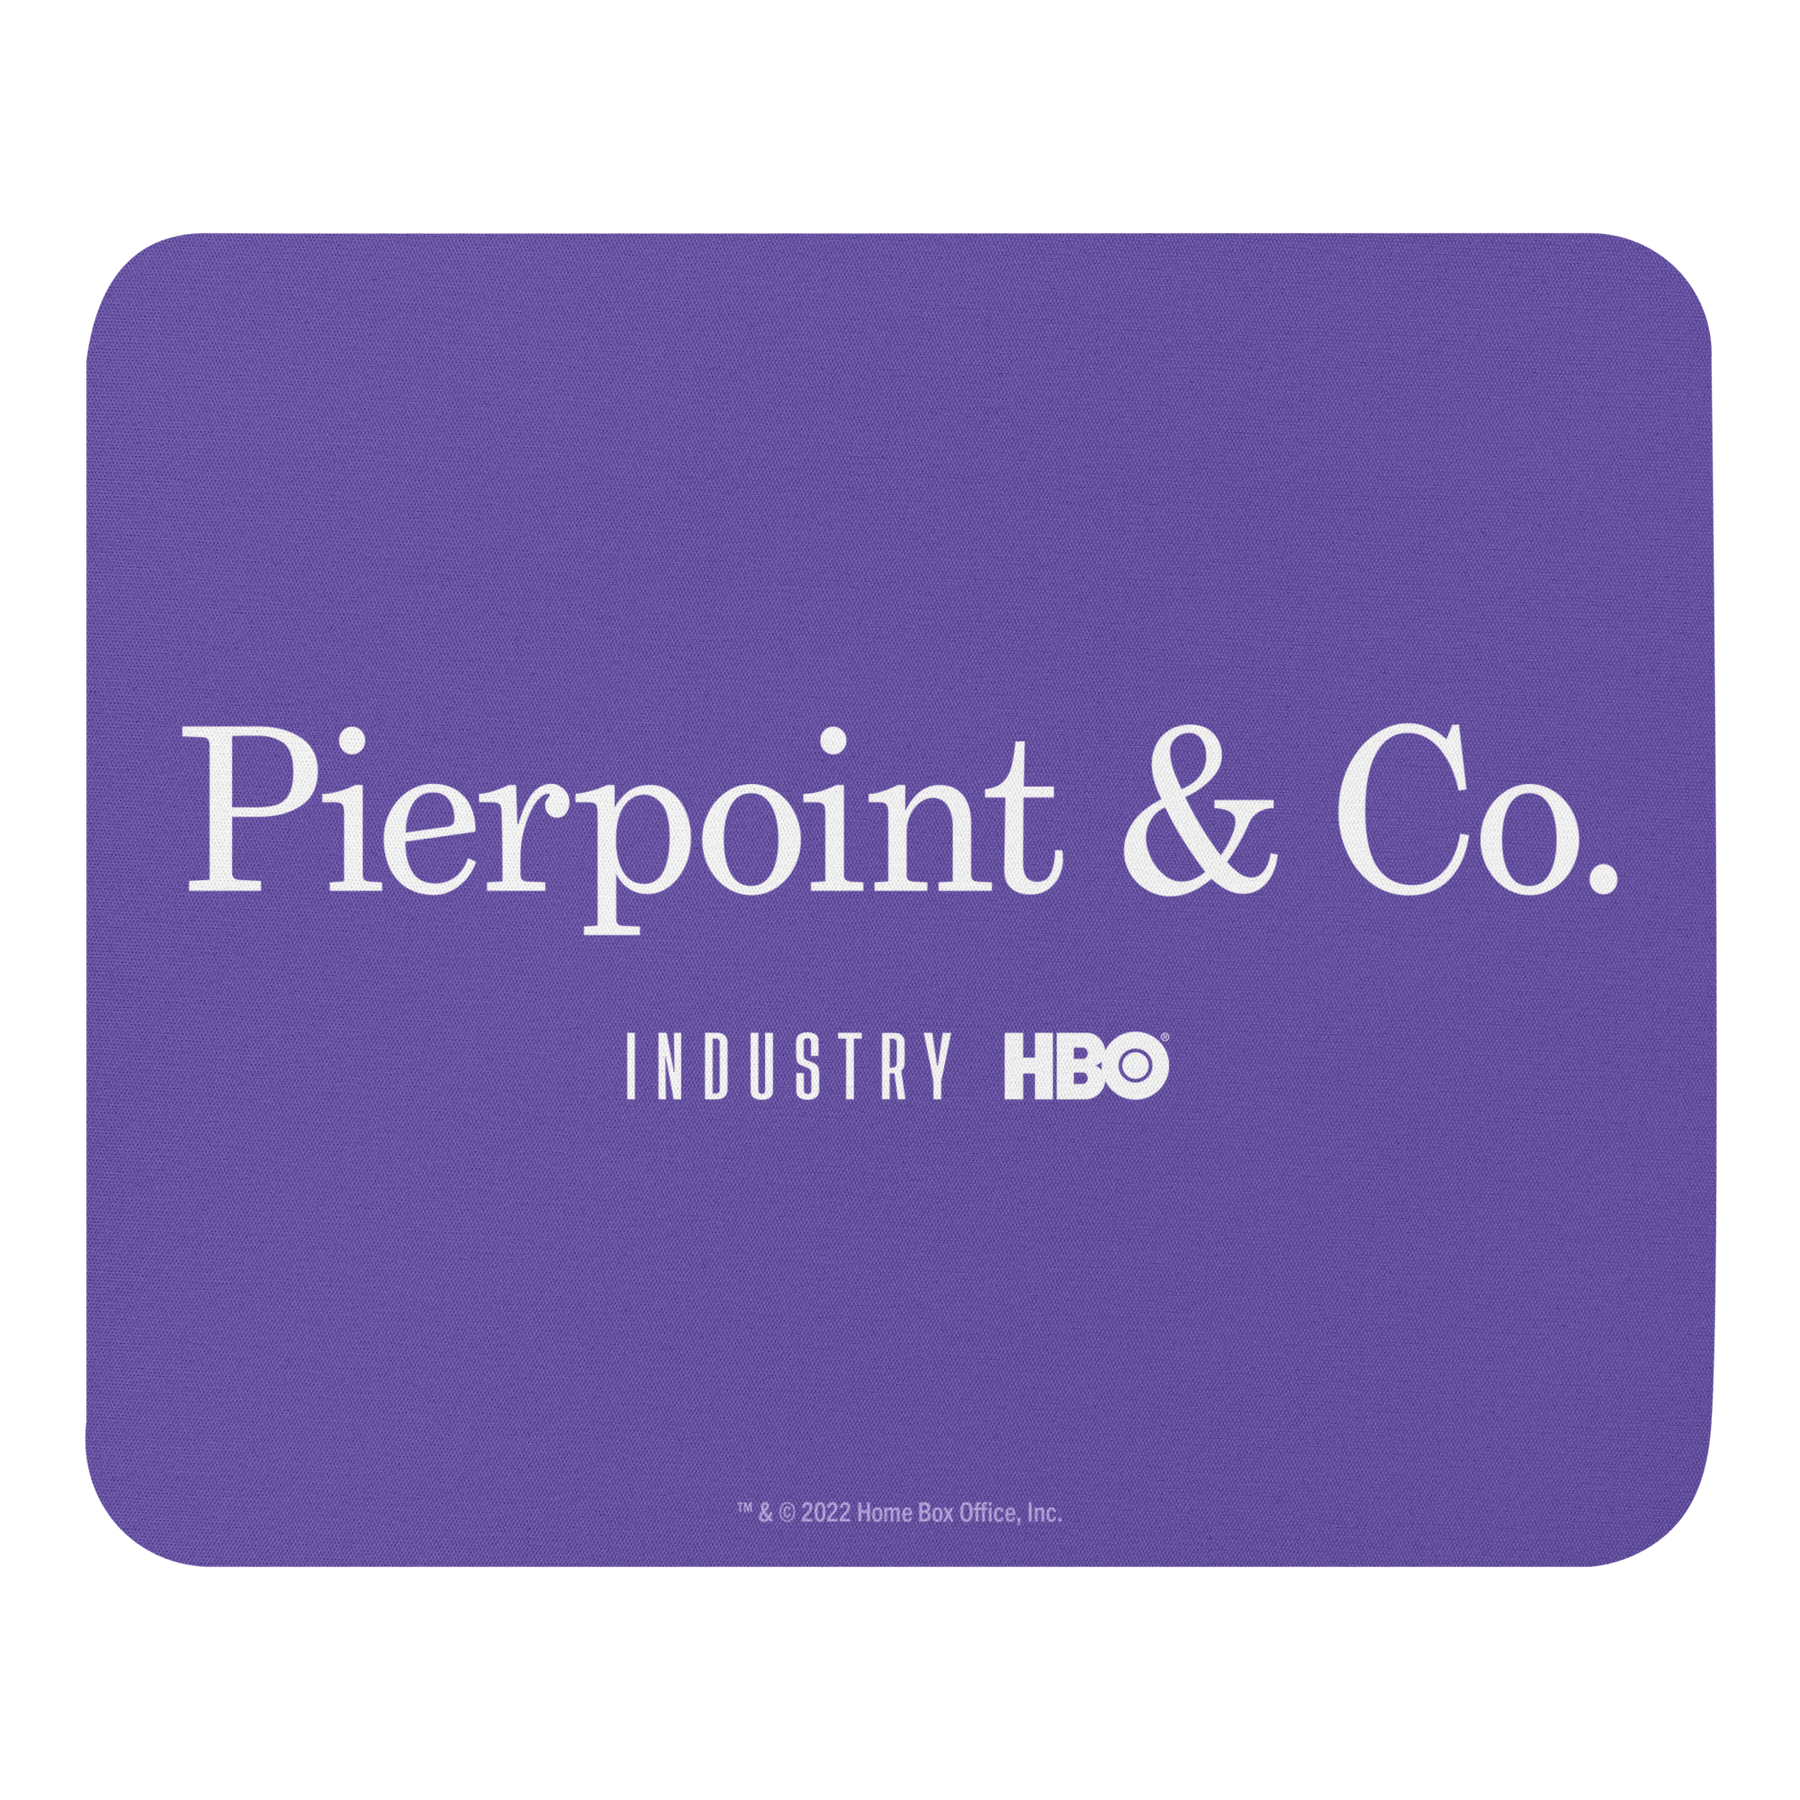 HBO Store: Shop Industry Gear & Step Into the Cut-Throat World of